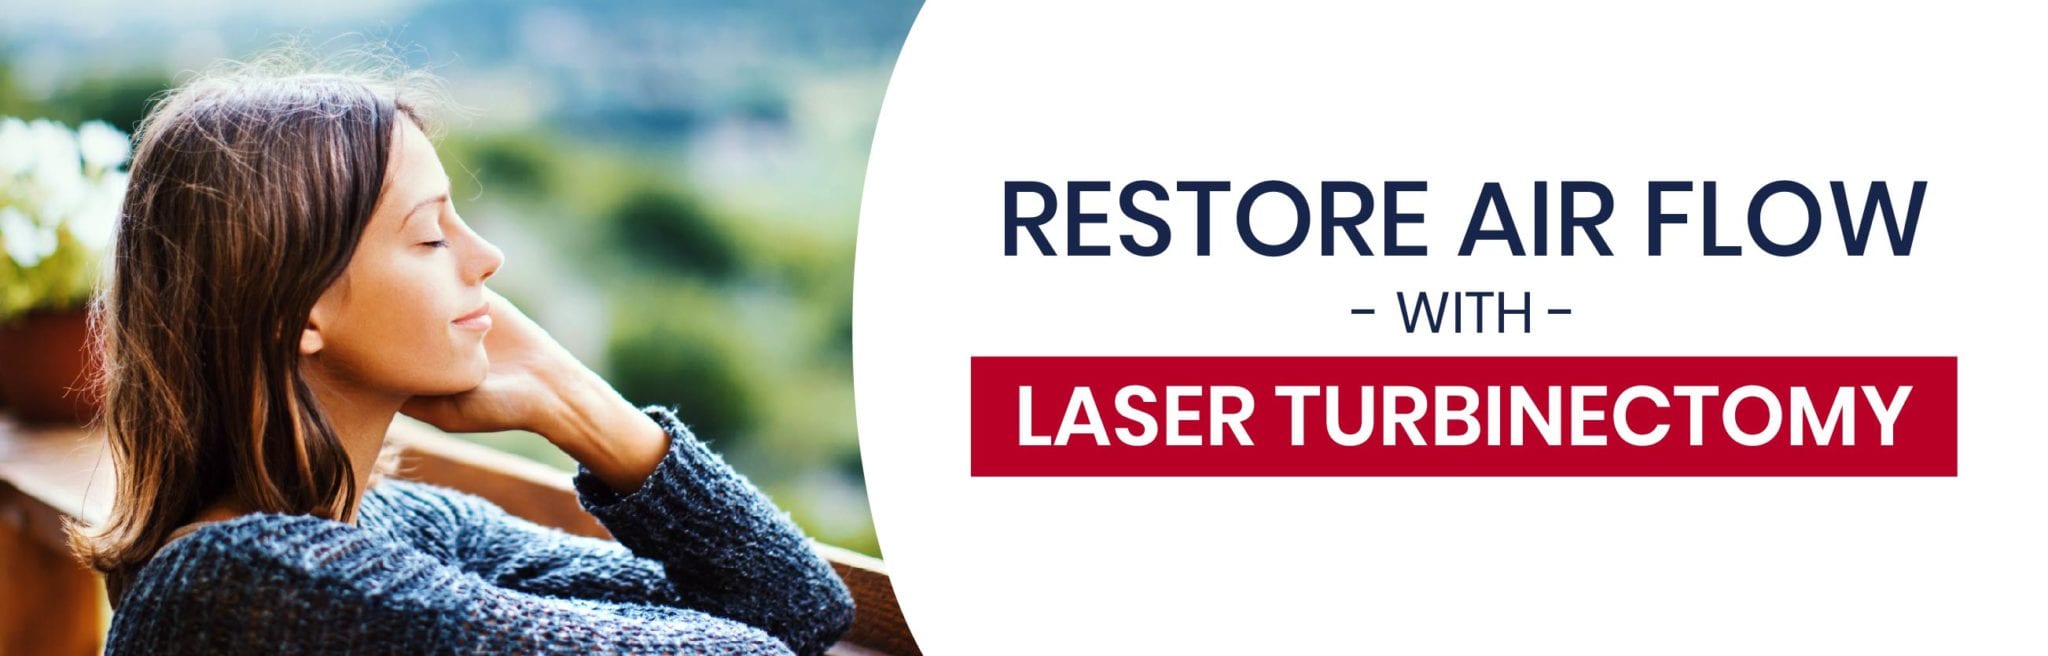 Laser Turbinectomy Specialists